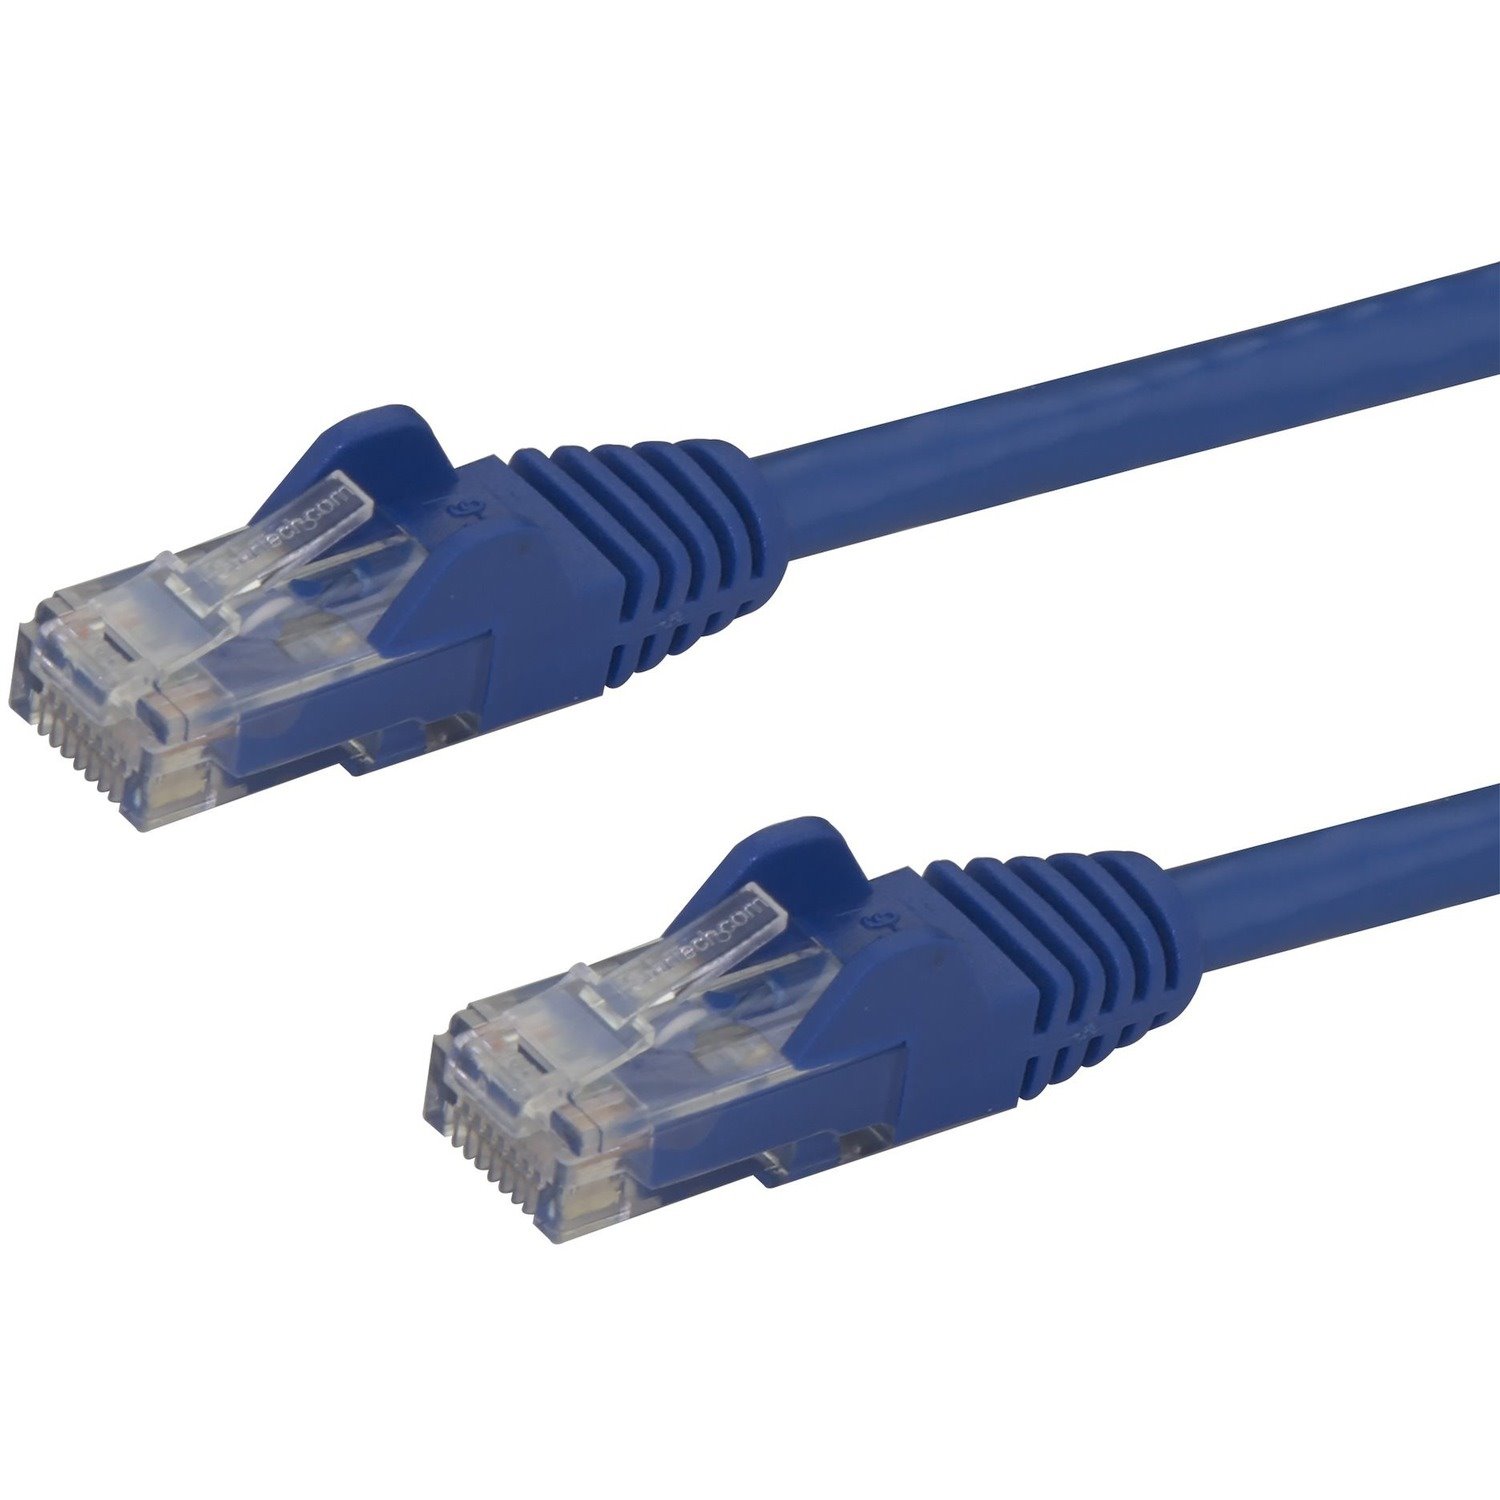 StarTech.com 50ft CAT6 Ethernet Cable - Blue Snagless Gigabit - 100W PoE UTP 650MHz Category 6 Patch Cord UL Certified Wiring/TIA